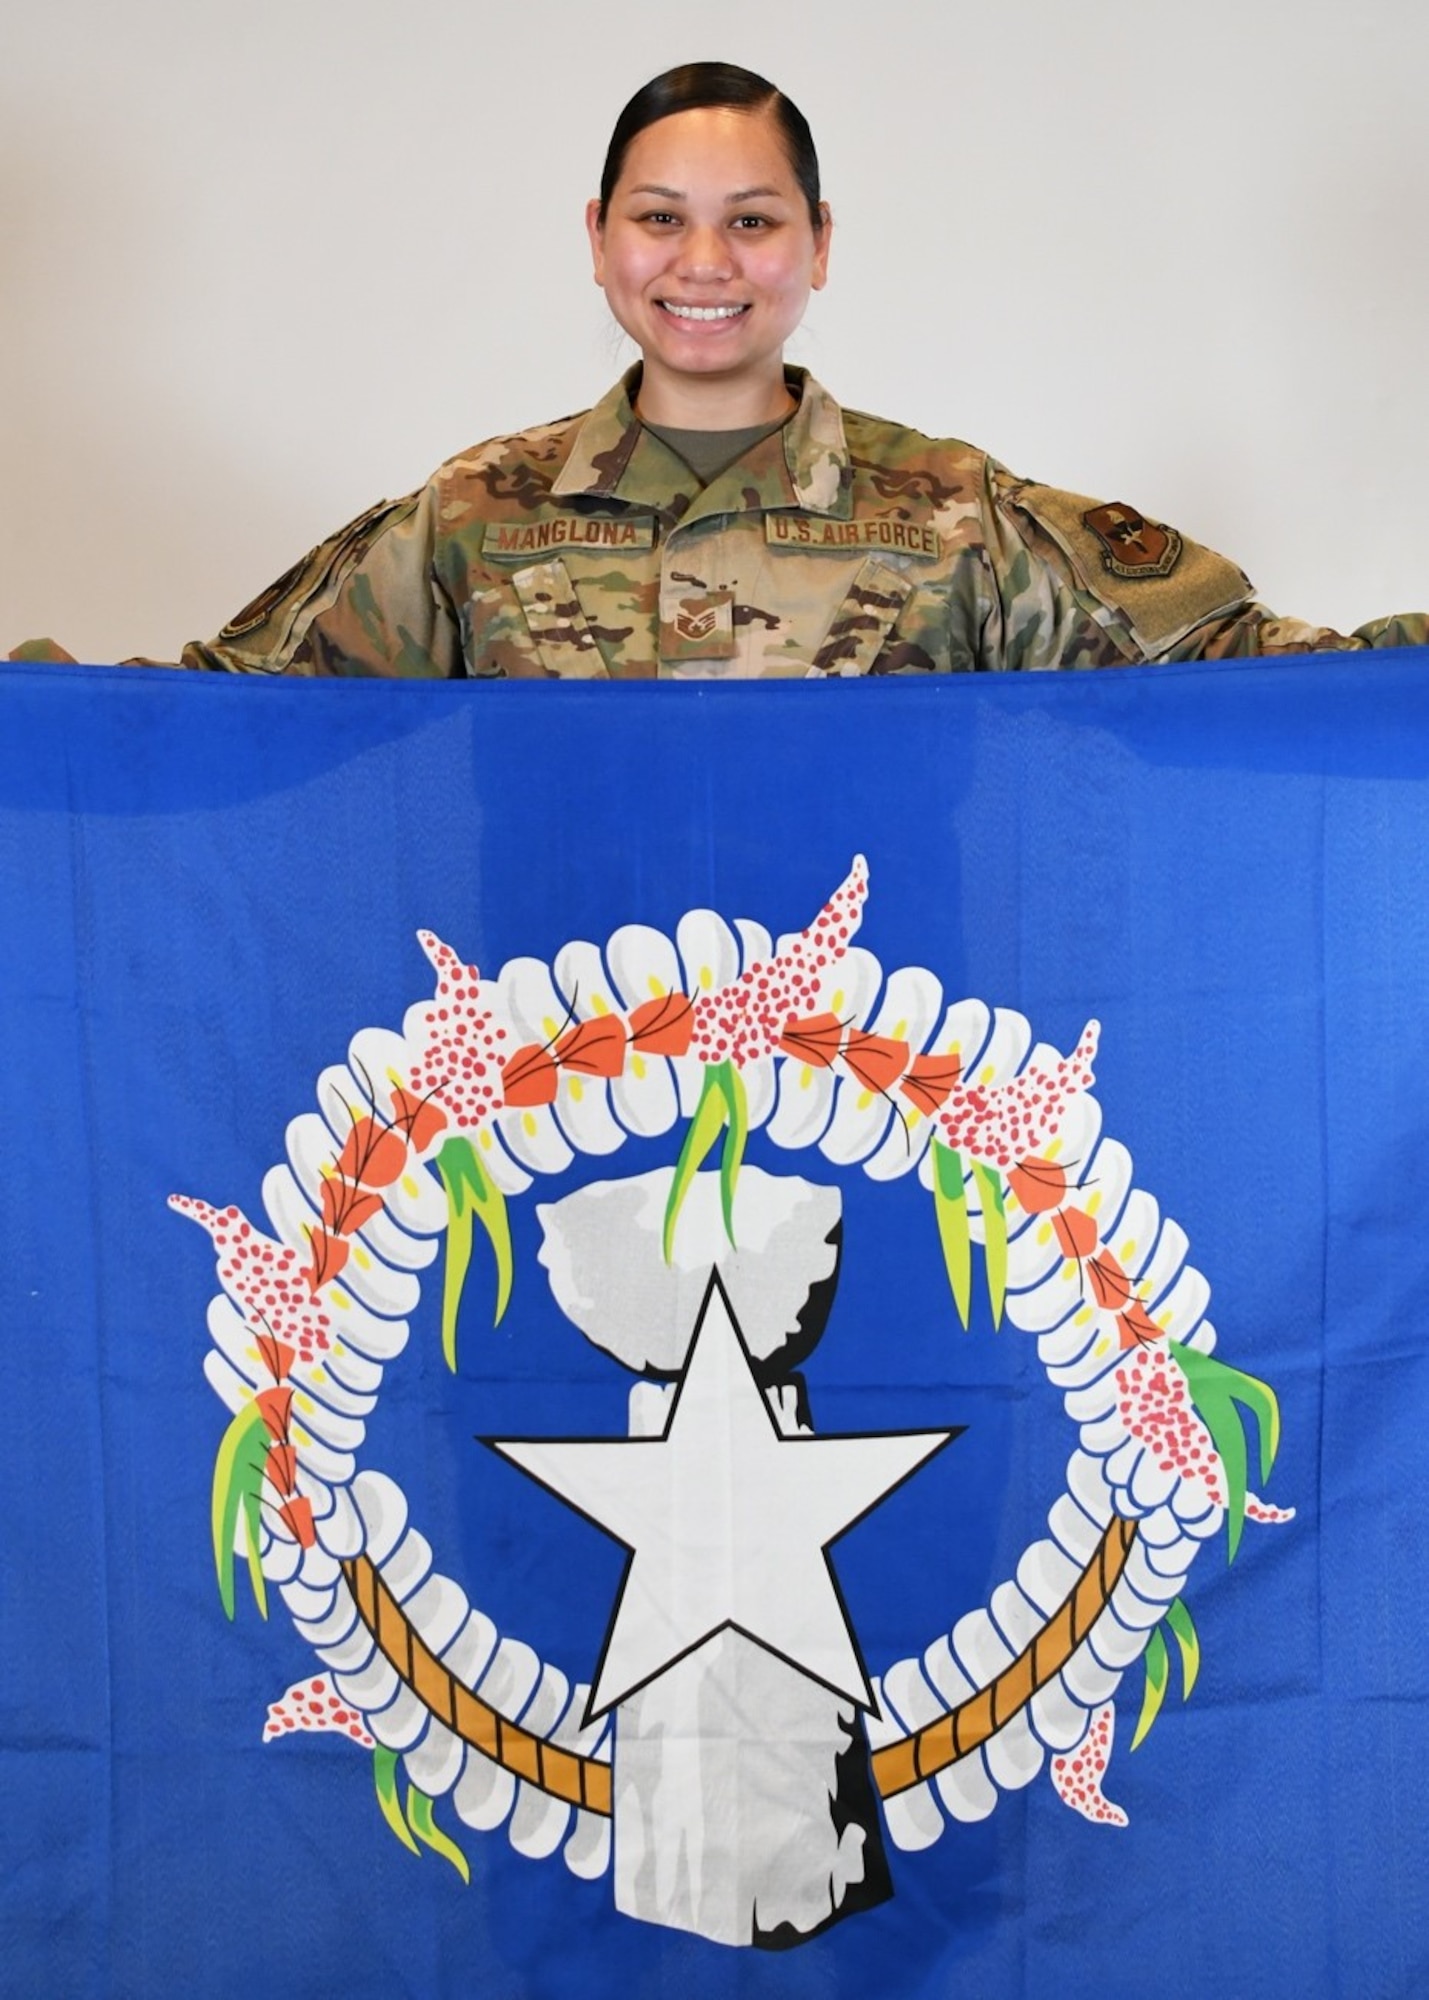 Staff Sgt. Conralyn Manglona, 56th Communications Squadron knowledge management technician, holds the Tinian flag May 24, 2021, at Luke Air Force Base, Arizona. Manglona is from Tinian, one of the islands of the Commonwealth of the Northern Mariana Islands. Diversity and inclusion in the U.S. Air Force are warfighting imperatives capitalizing on all available talent by enabling a culture where all Airmen are valued and respected for their identity, culture and background. (U.S. Air Force photo by Senior Airman Caitlin Diaz-Gorsi)